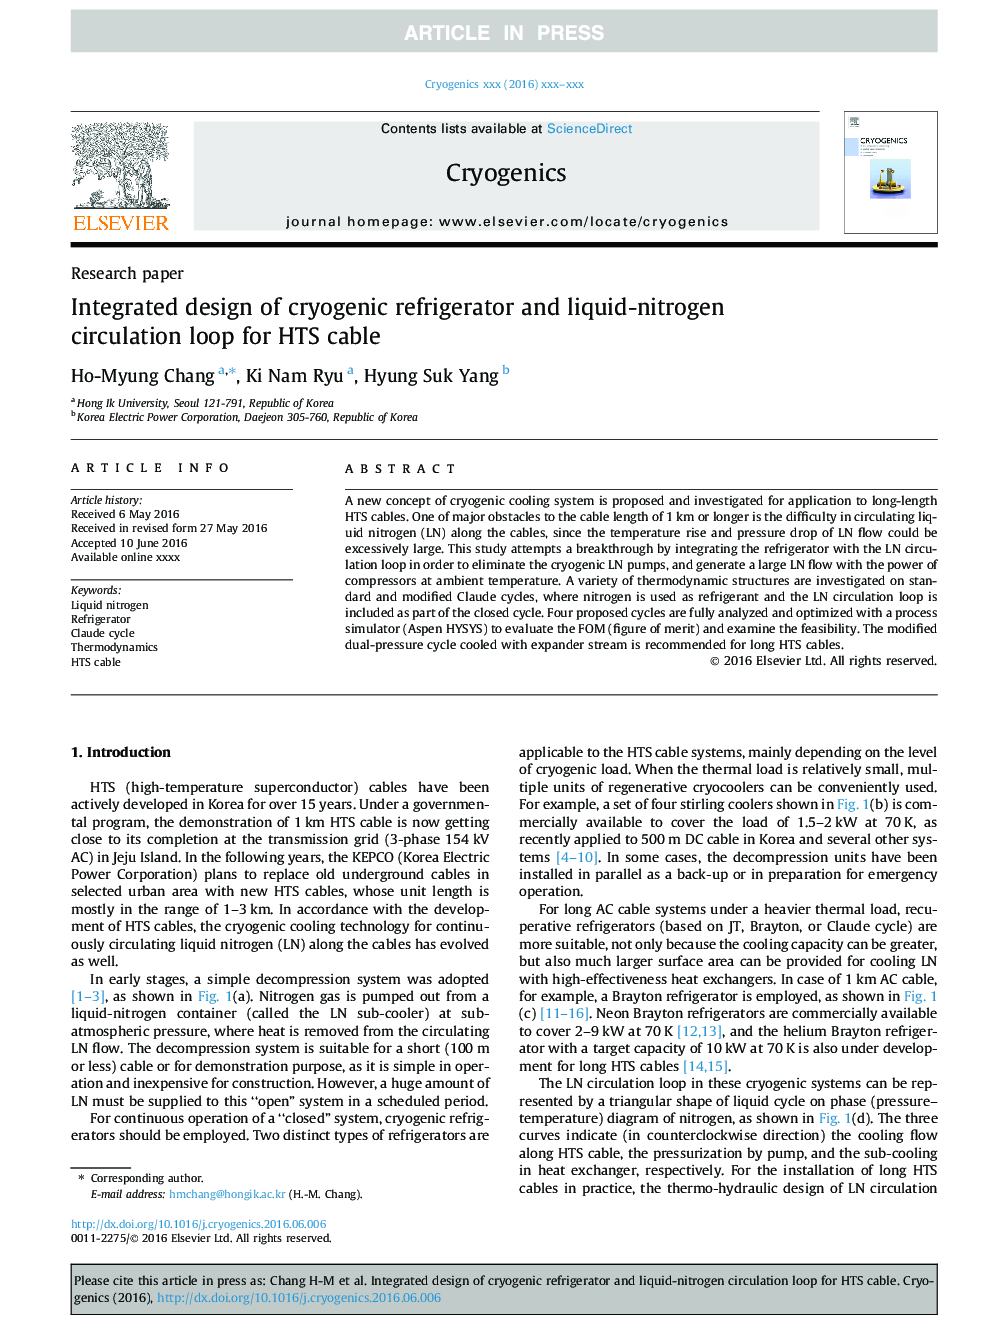 Integrated design of cryogenic refrigerator and liquid-nitrogen circulation loop for HTS cable